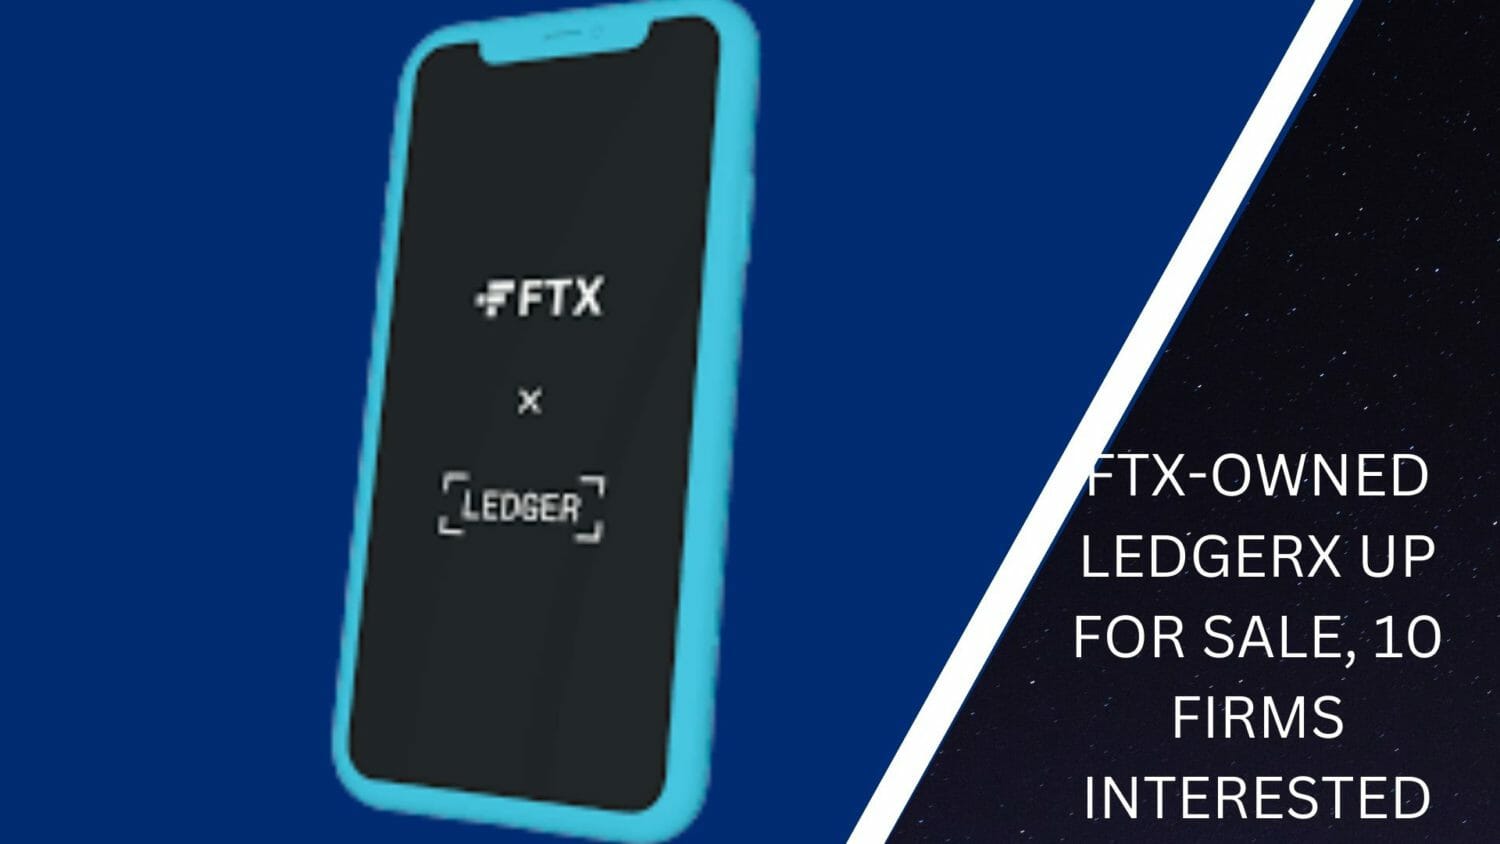 Ftx-Owned Ledgerx Up For Sale, 10 Firms Interested